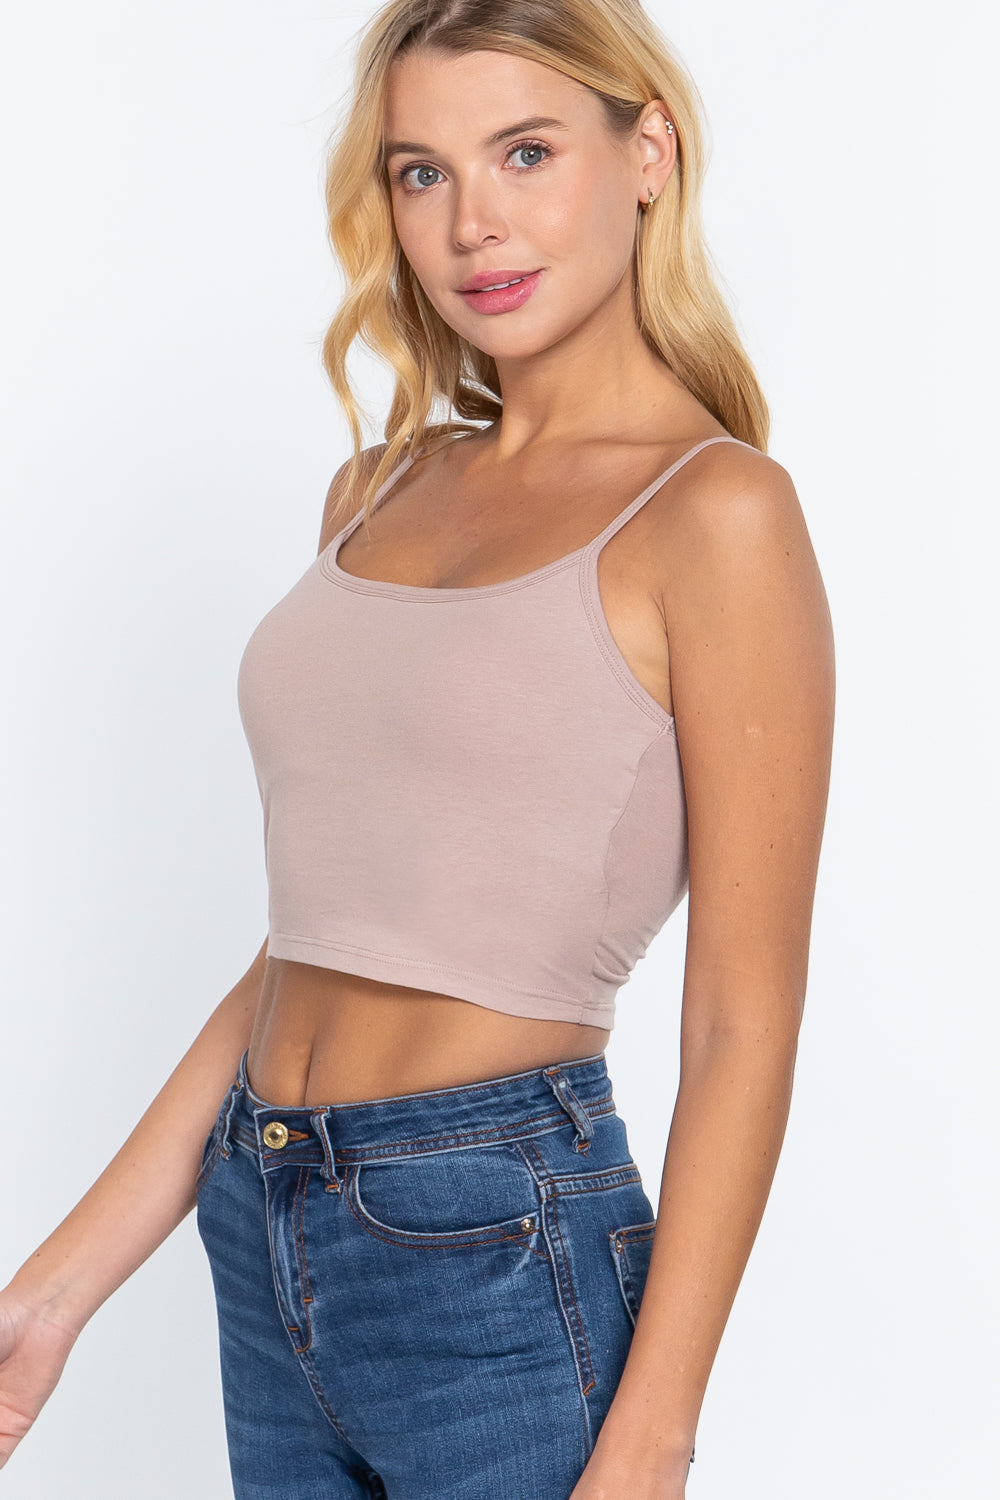 Round Neck with Removable Bra Cup Cotton Spandex Bra Top in Cloud Mauve